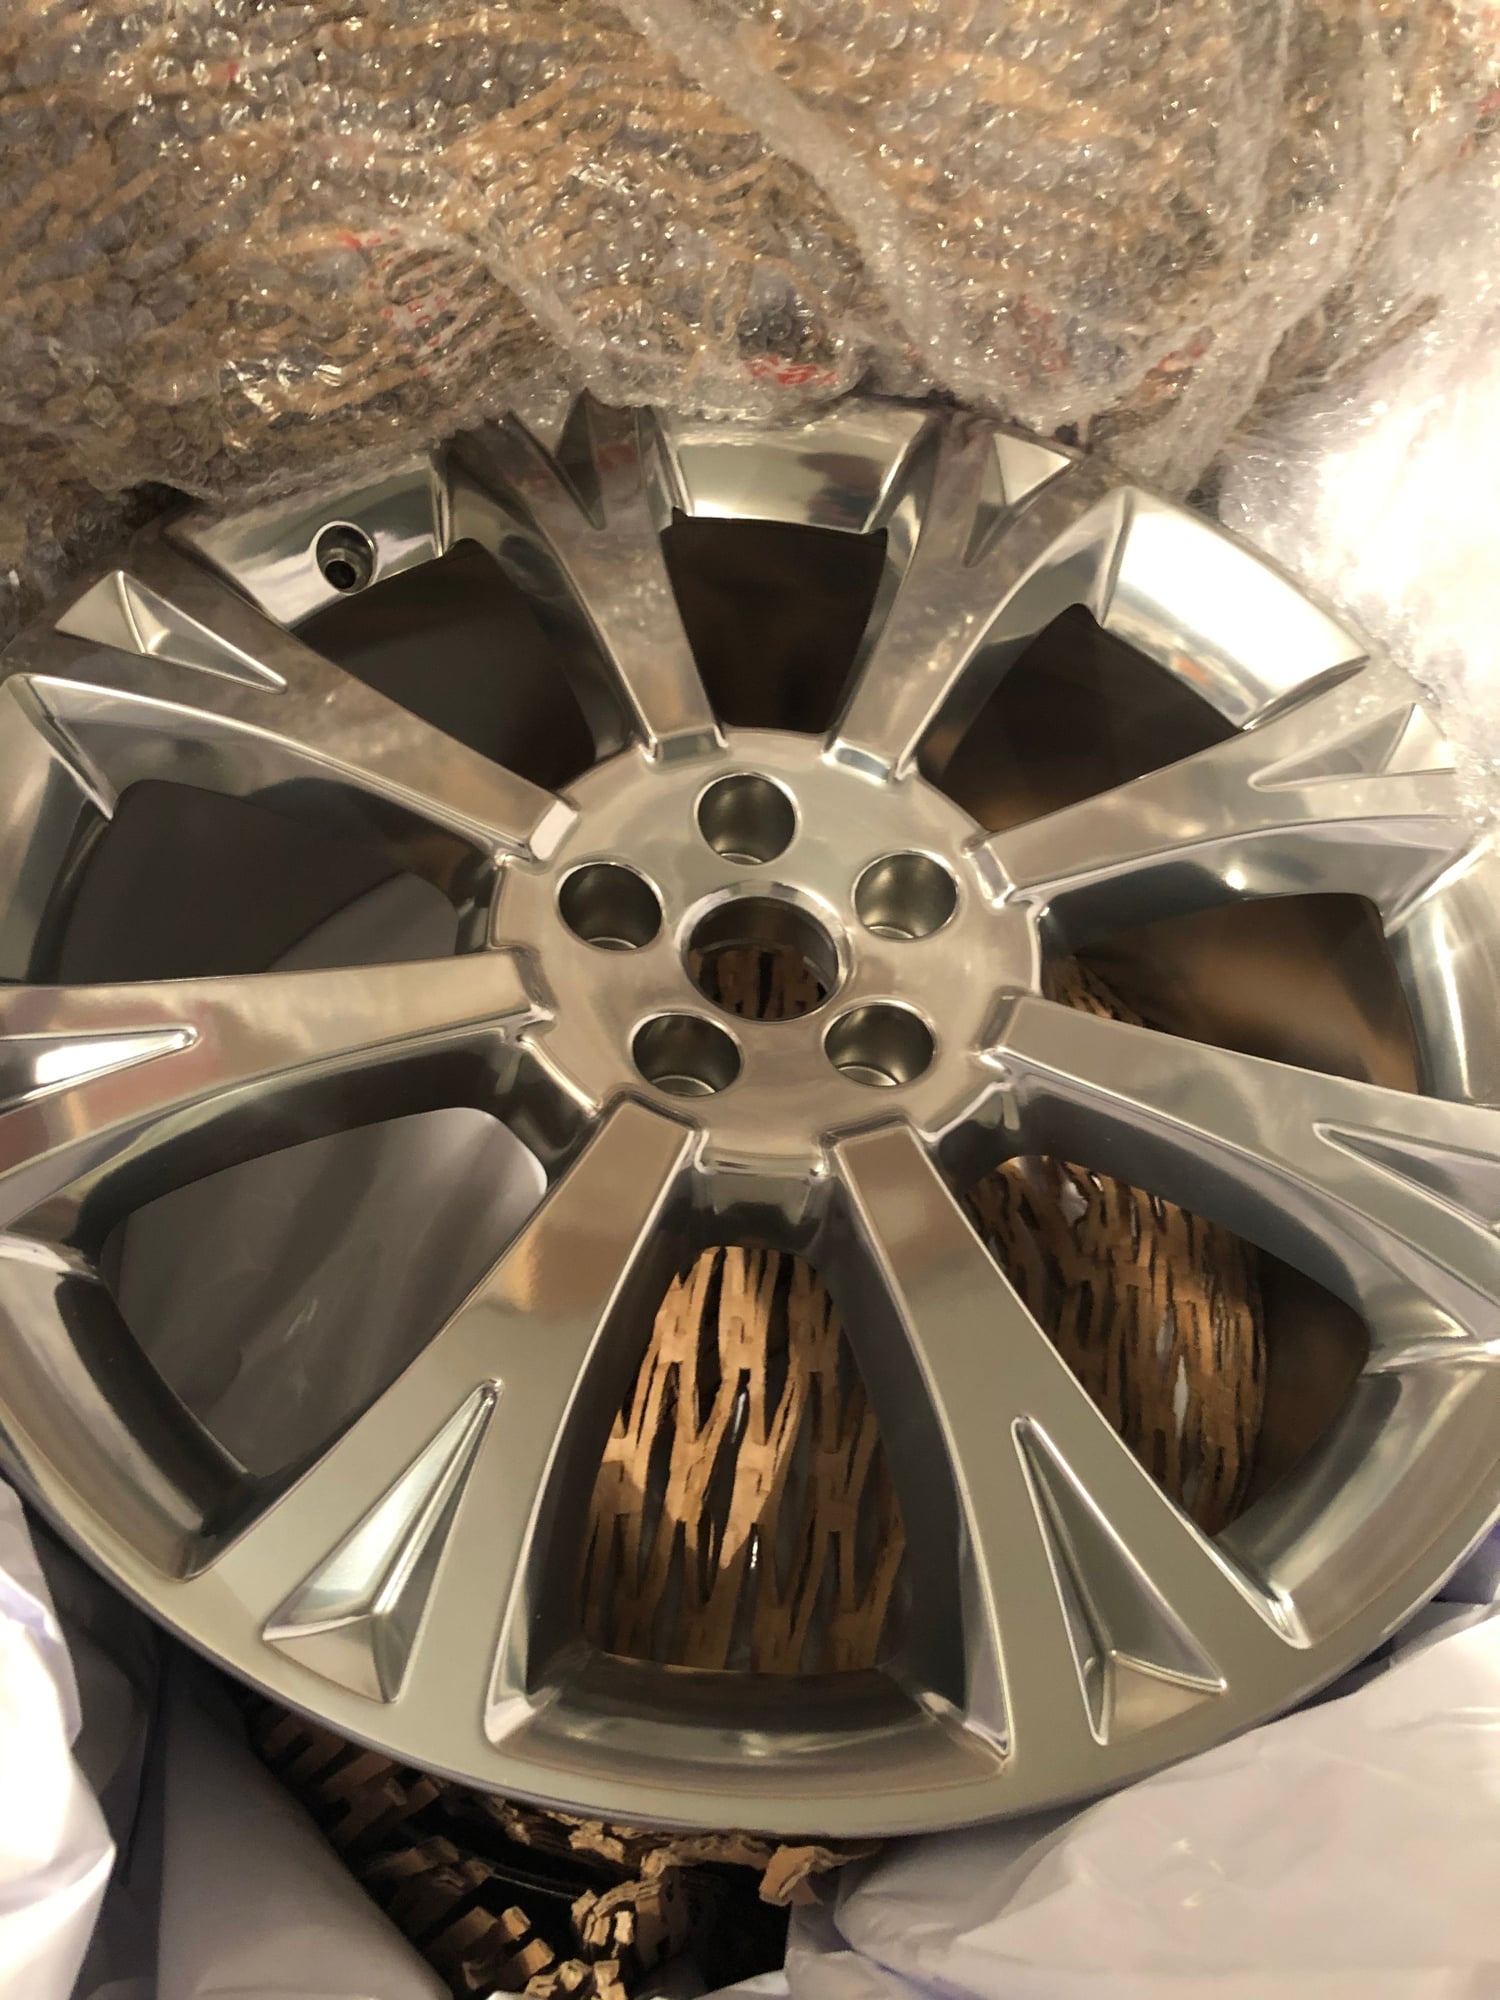 Wheels and Tires/Axles - New OEM Polished Aluminum Orona front wheel, for XJ or XK,  never installed - New - 2011 to 2019 Jaguar XJ - 2011 to 2014 Jaguar XK - Brooksville, FL 34602, United States